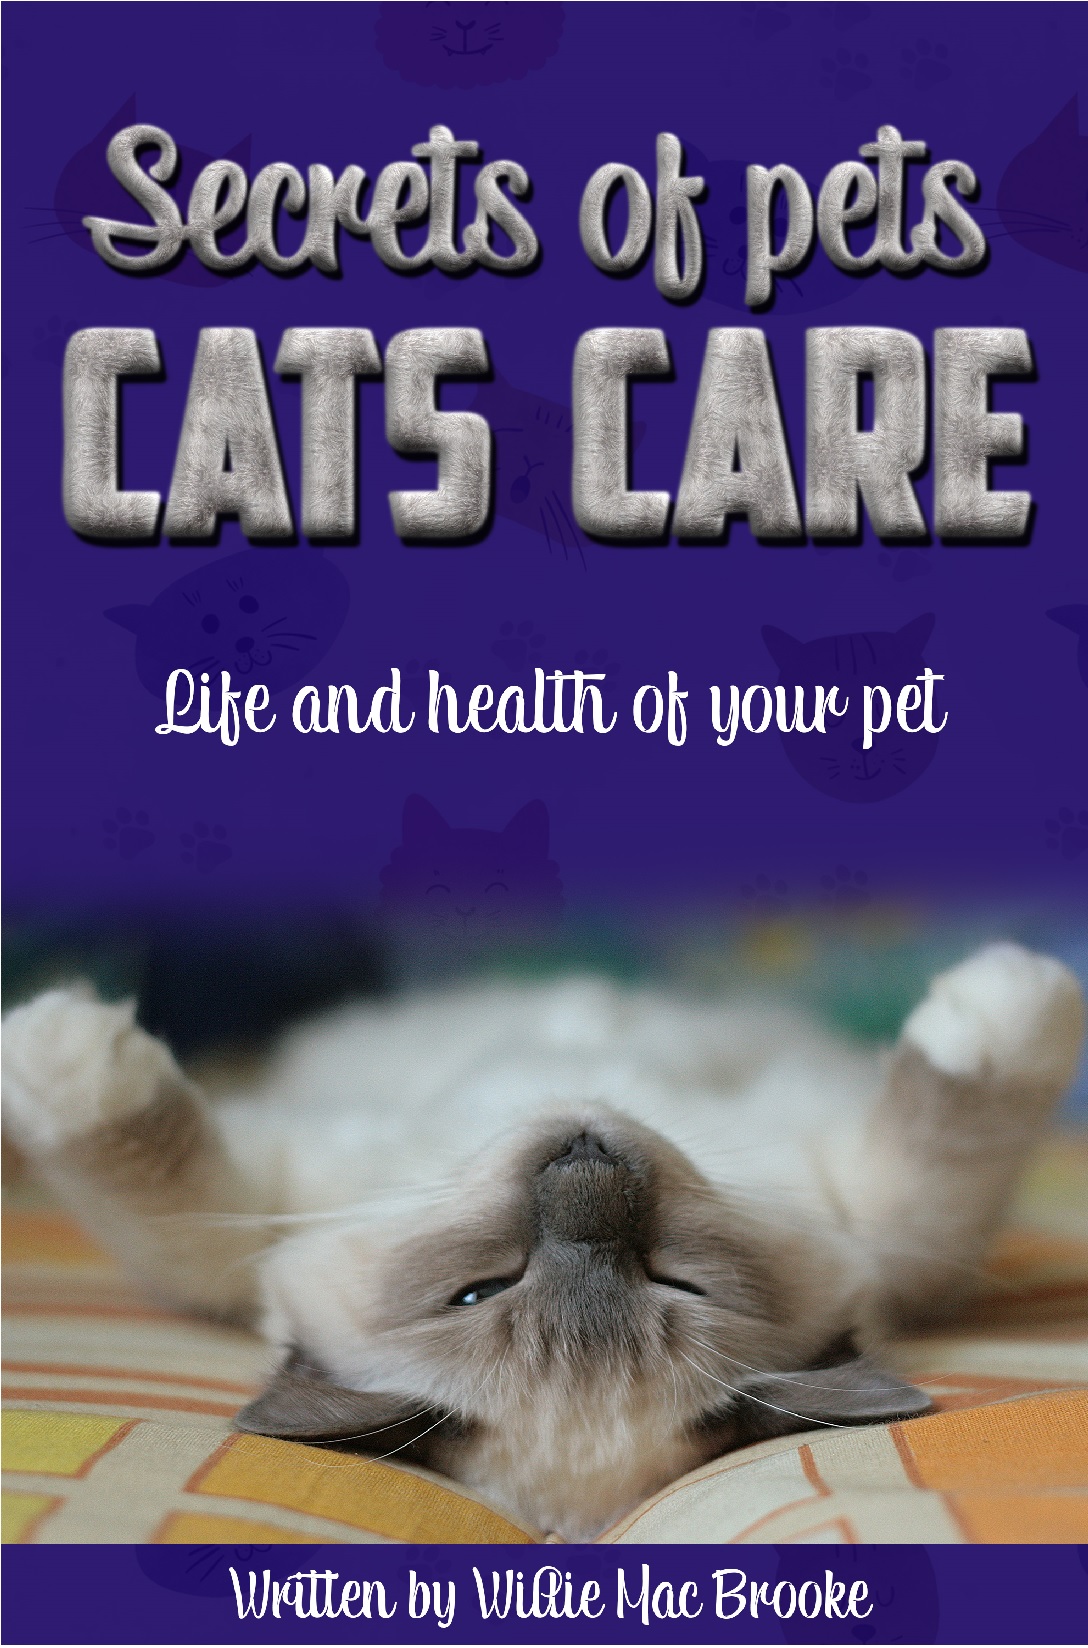 FREE: Secrets of Pets: Cats Care. A Guide to Ensure a Good Life and Health of Your Pet. (Choosing a Cat, Caring for a Cat’s Fur, Feeding a Cat, Training a Cat): Life and health of your pet by Willie Mac Brooke